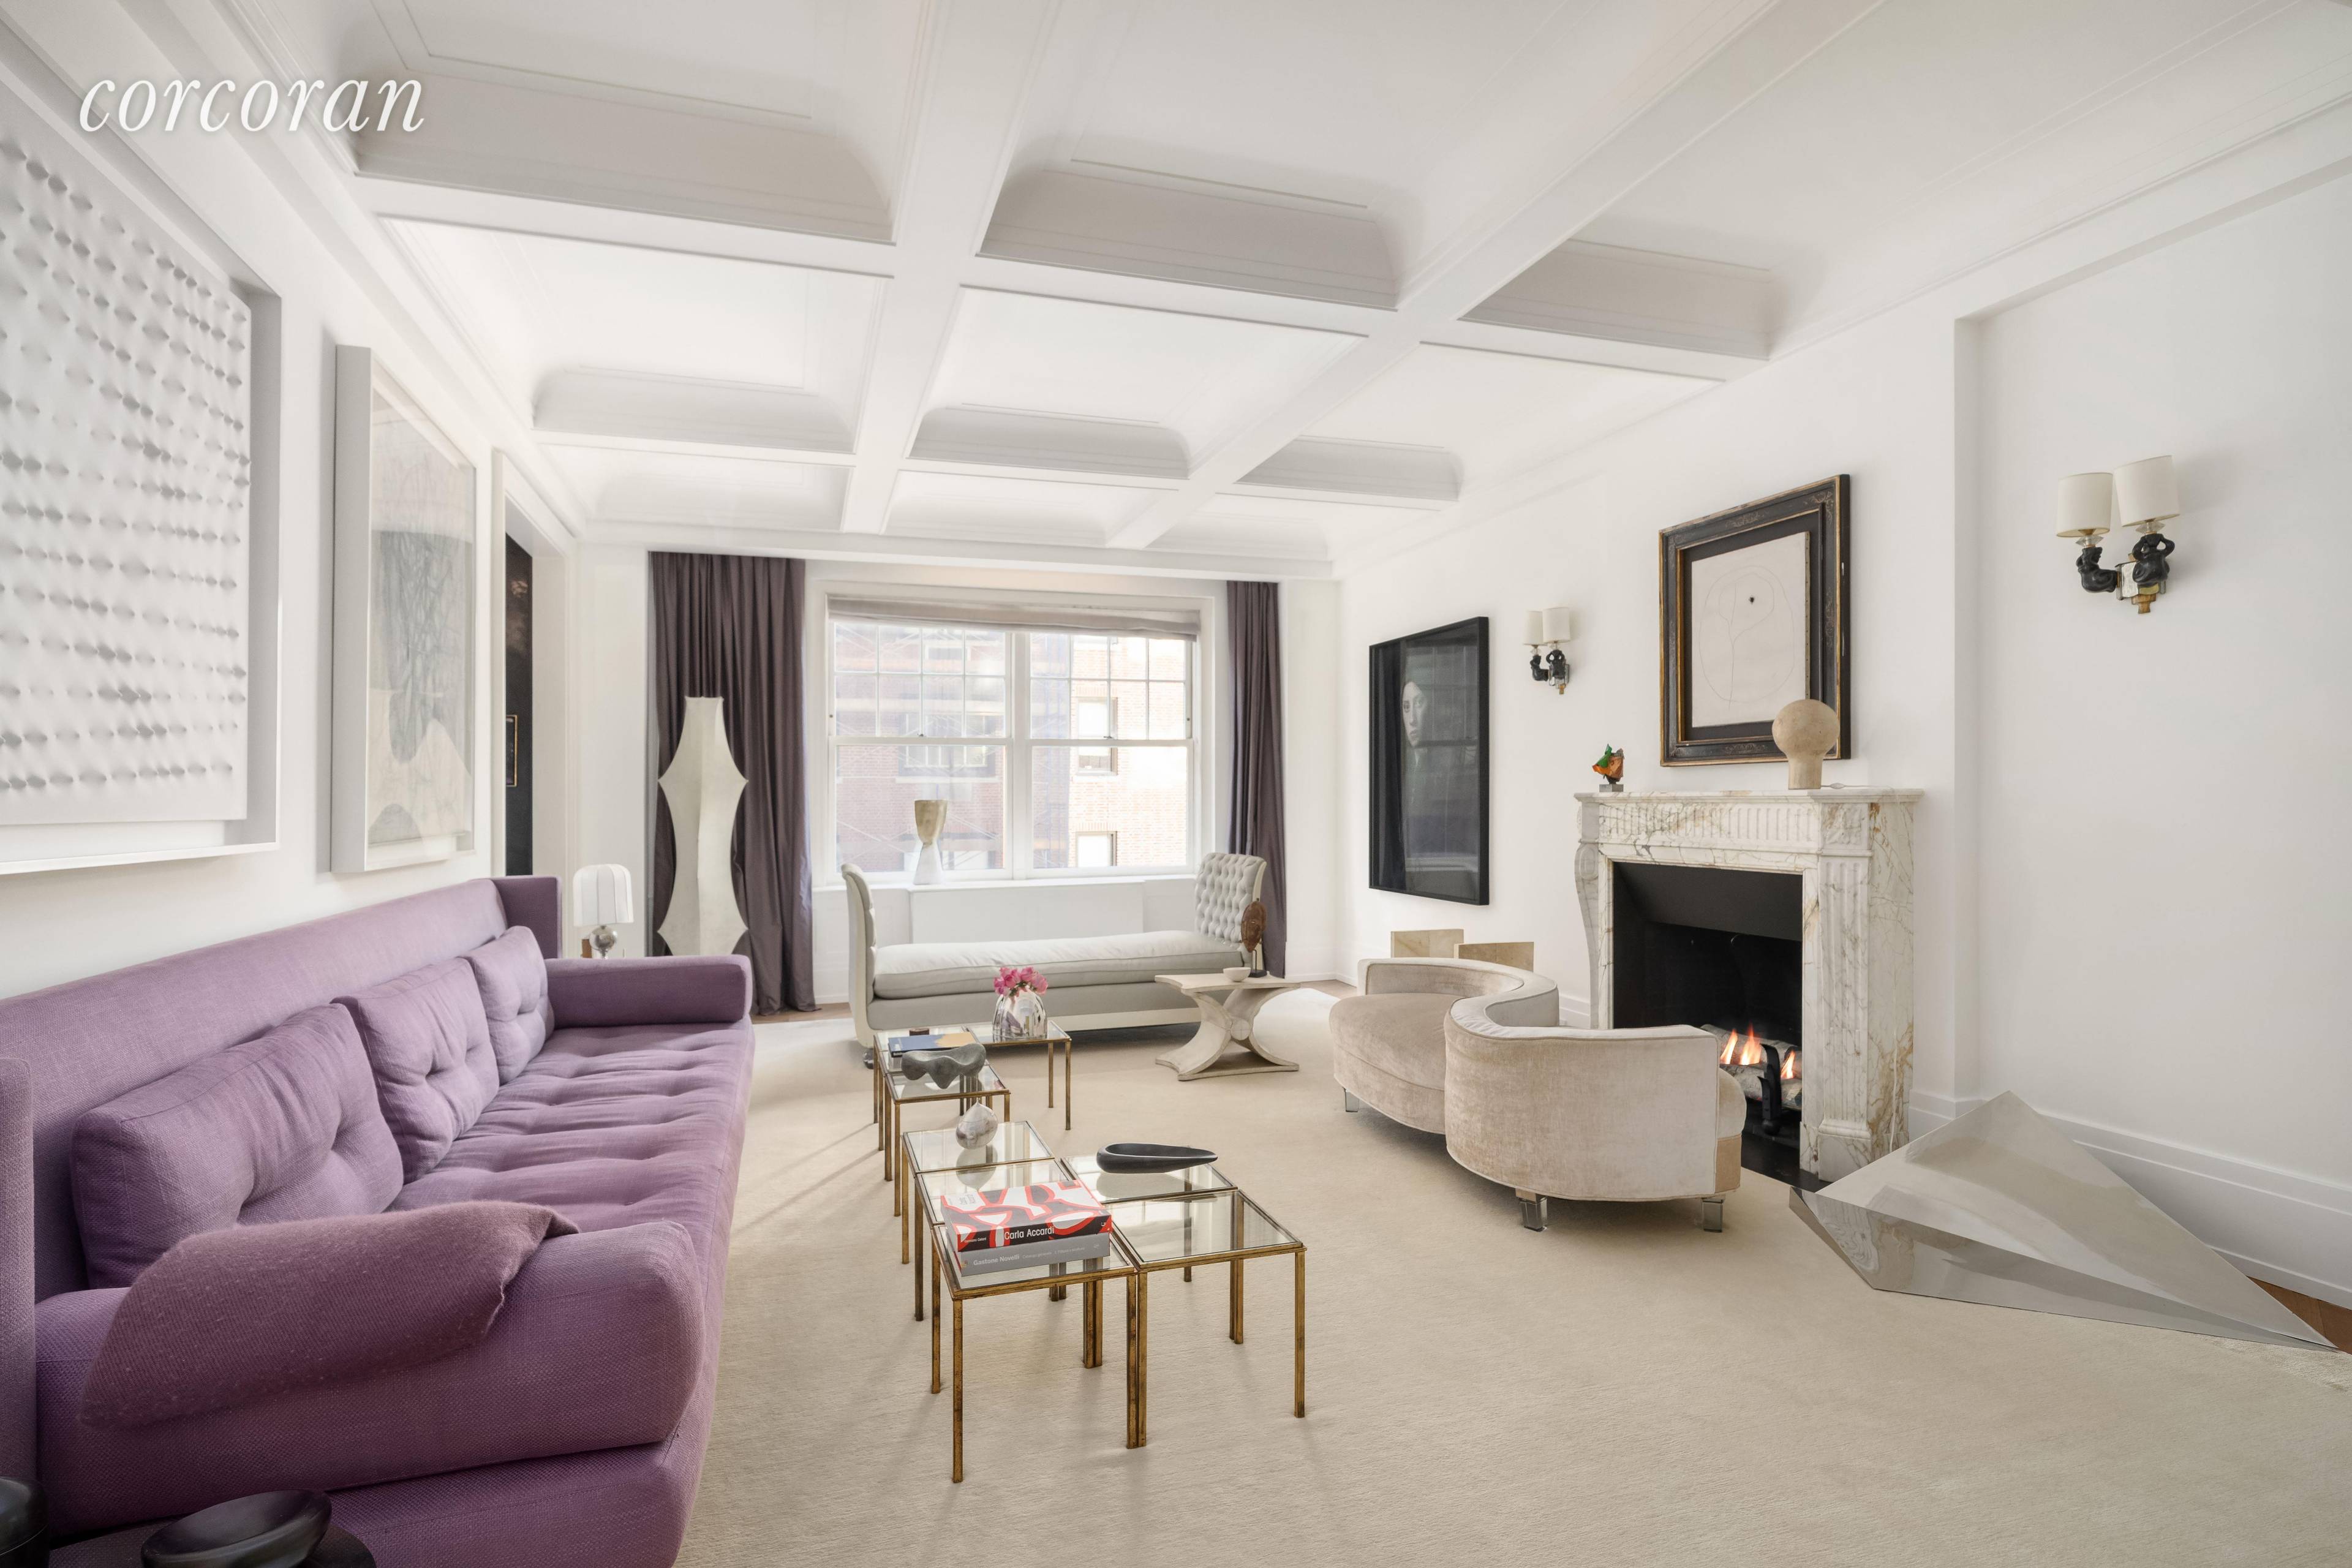 For the most discerning of buyers, this exquisitely renovated 9 room residence featuring 3 generously proportioned bedrooms, 4 full windowed baths and one half bath, gracious living room, library, formal ...